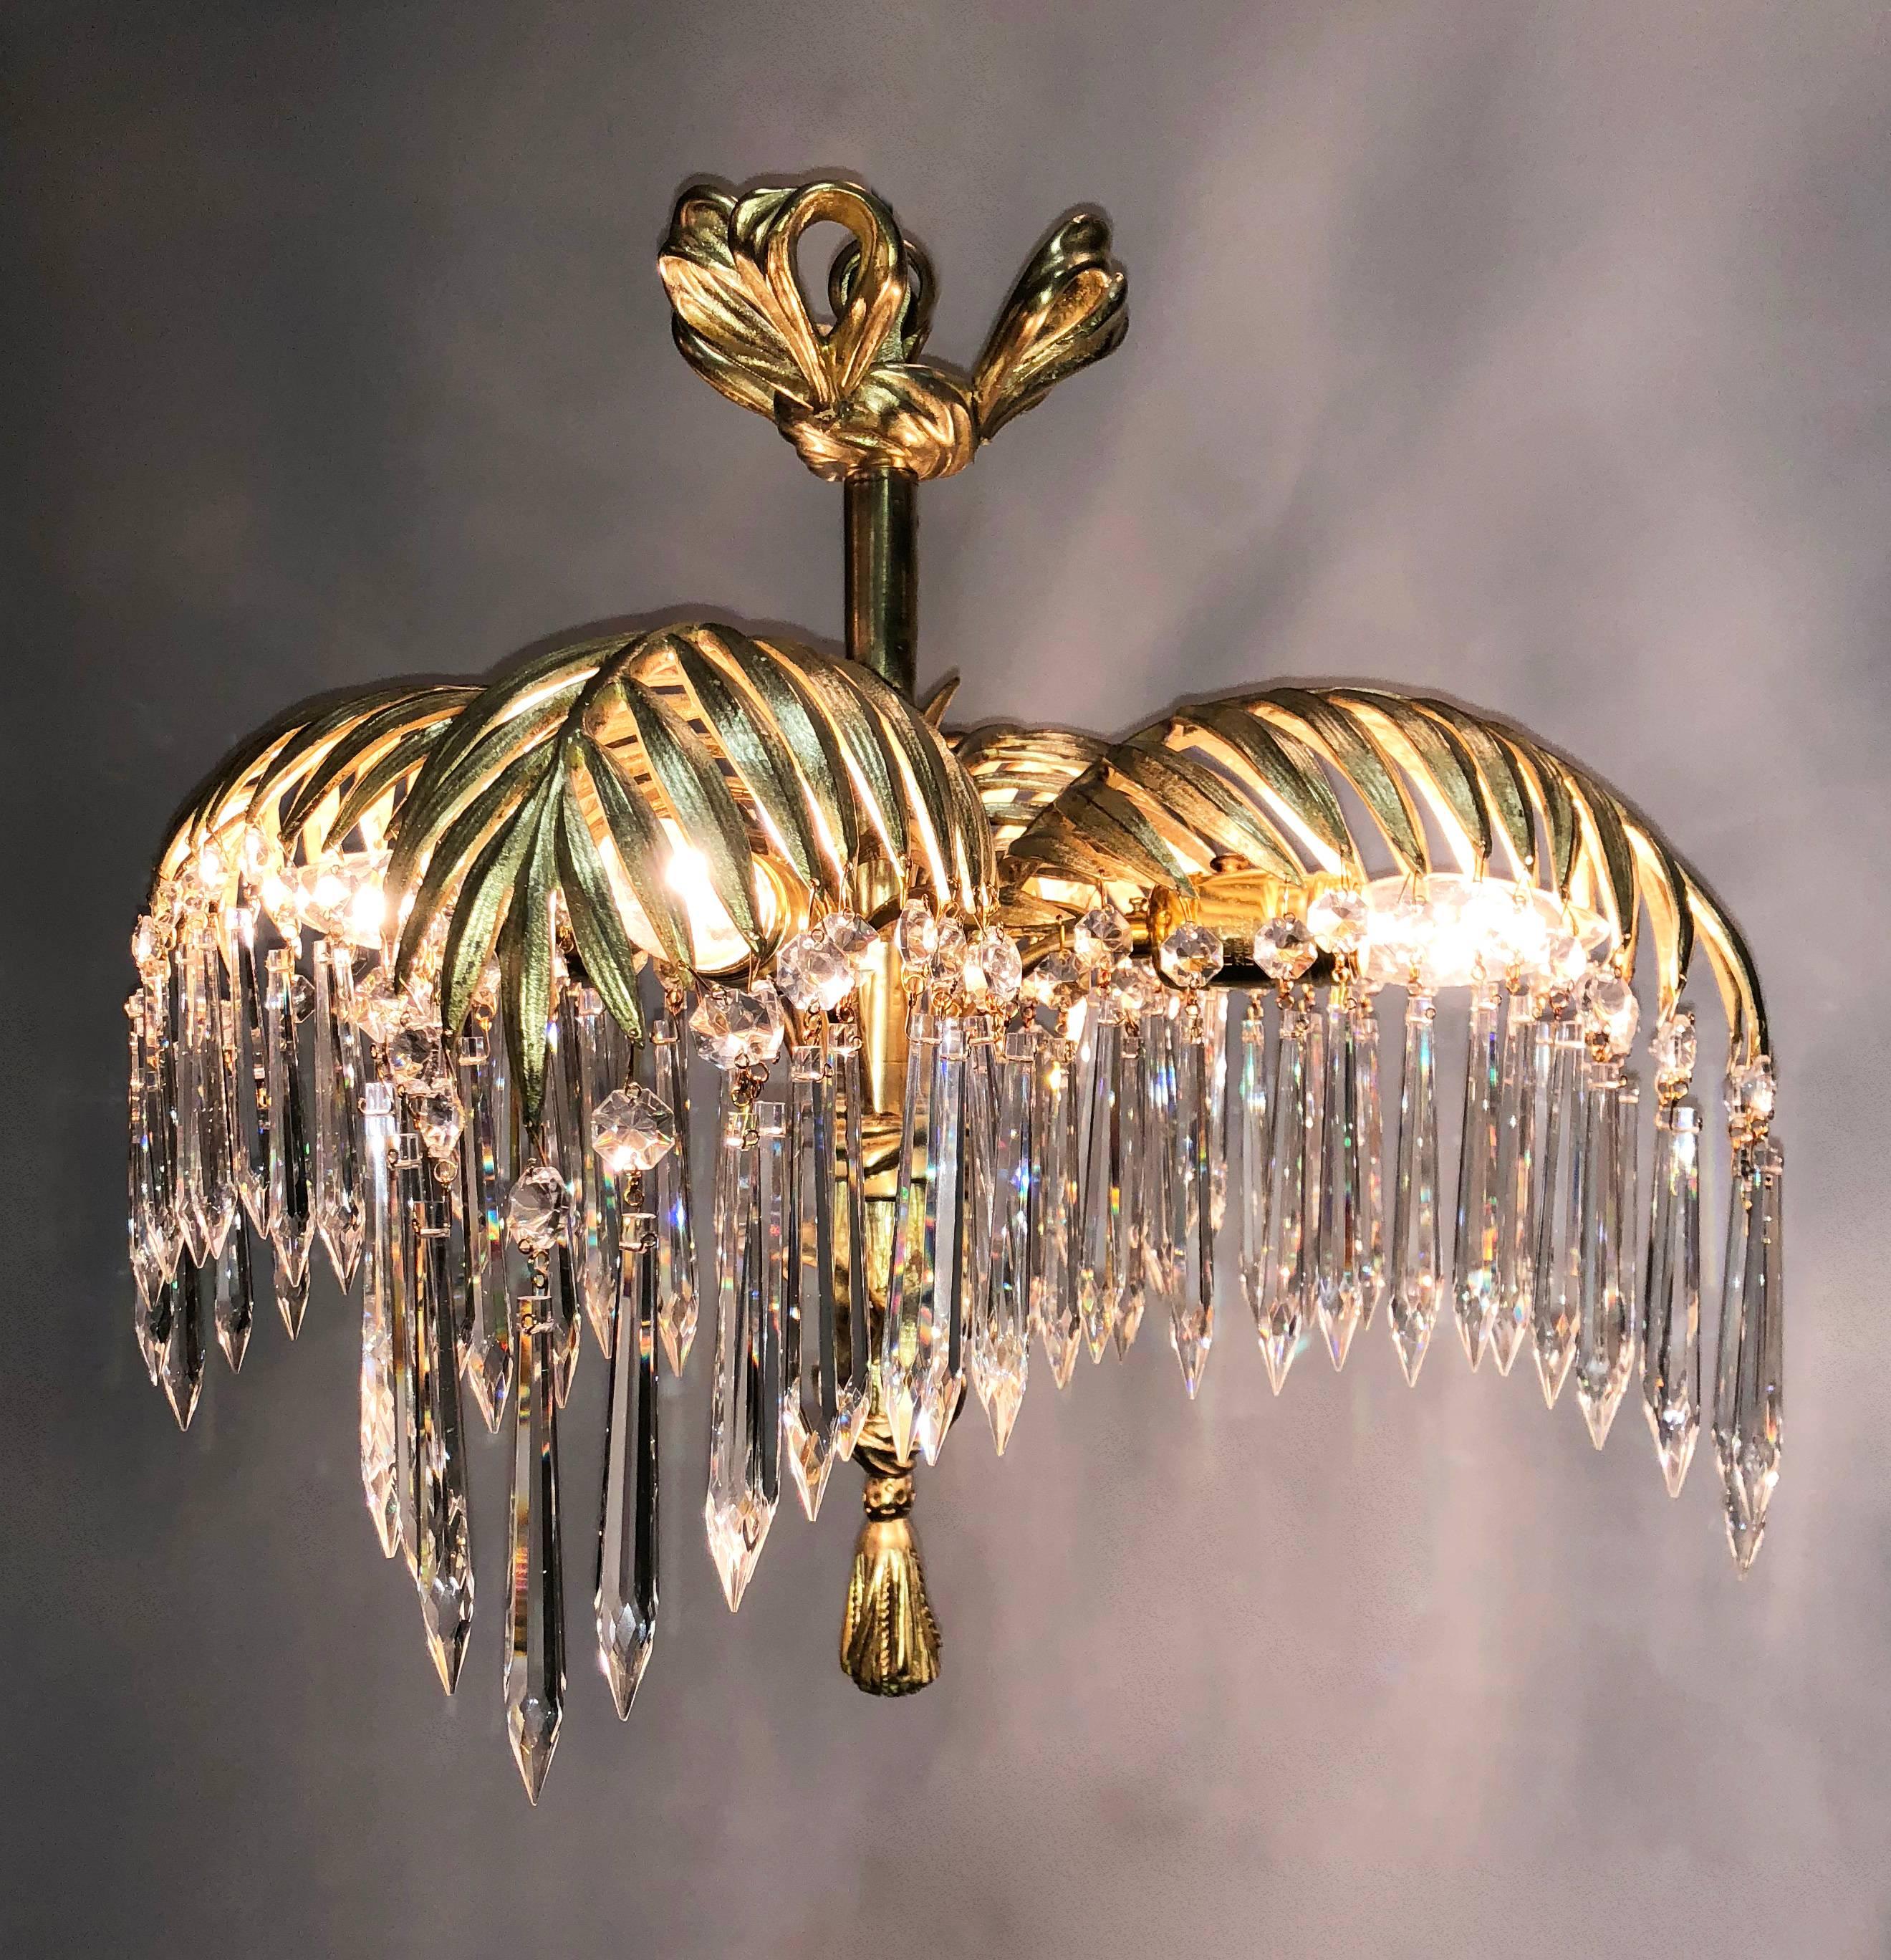 Dore Bronze palm fronds chandelier with ribbon canopy top with a faux tree center stem wrapped in ribbon coming down to a tassel. Hand-cut French crystal hand from the palm fronds. Edison bulbs are in the sockets. It is rare to find four palm frond